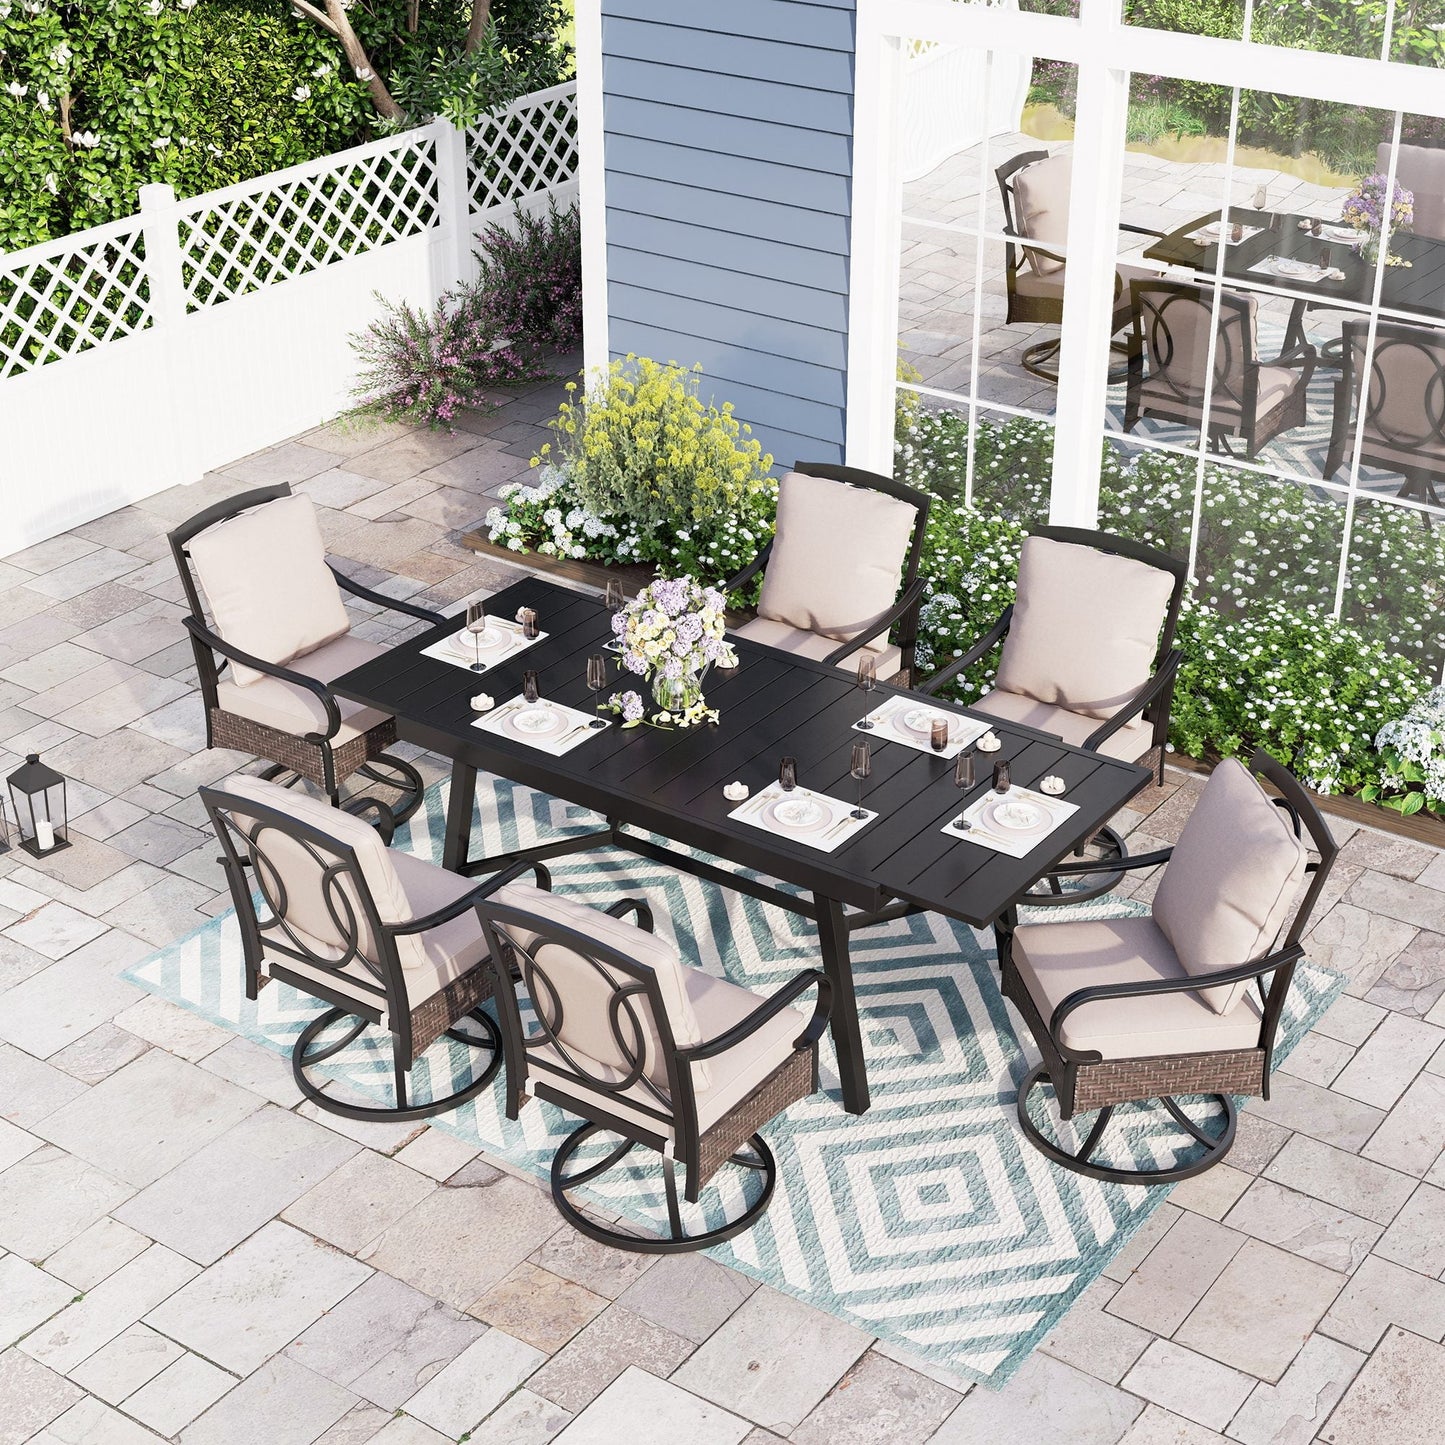 7-Piece Patio Dining Set with Extendable Table & 6 Swivel Chairs, Black & Beige